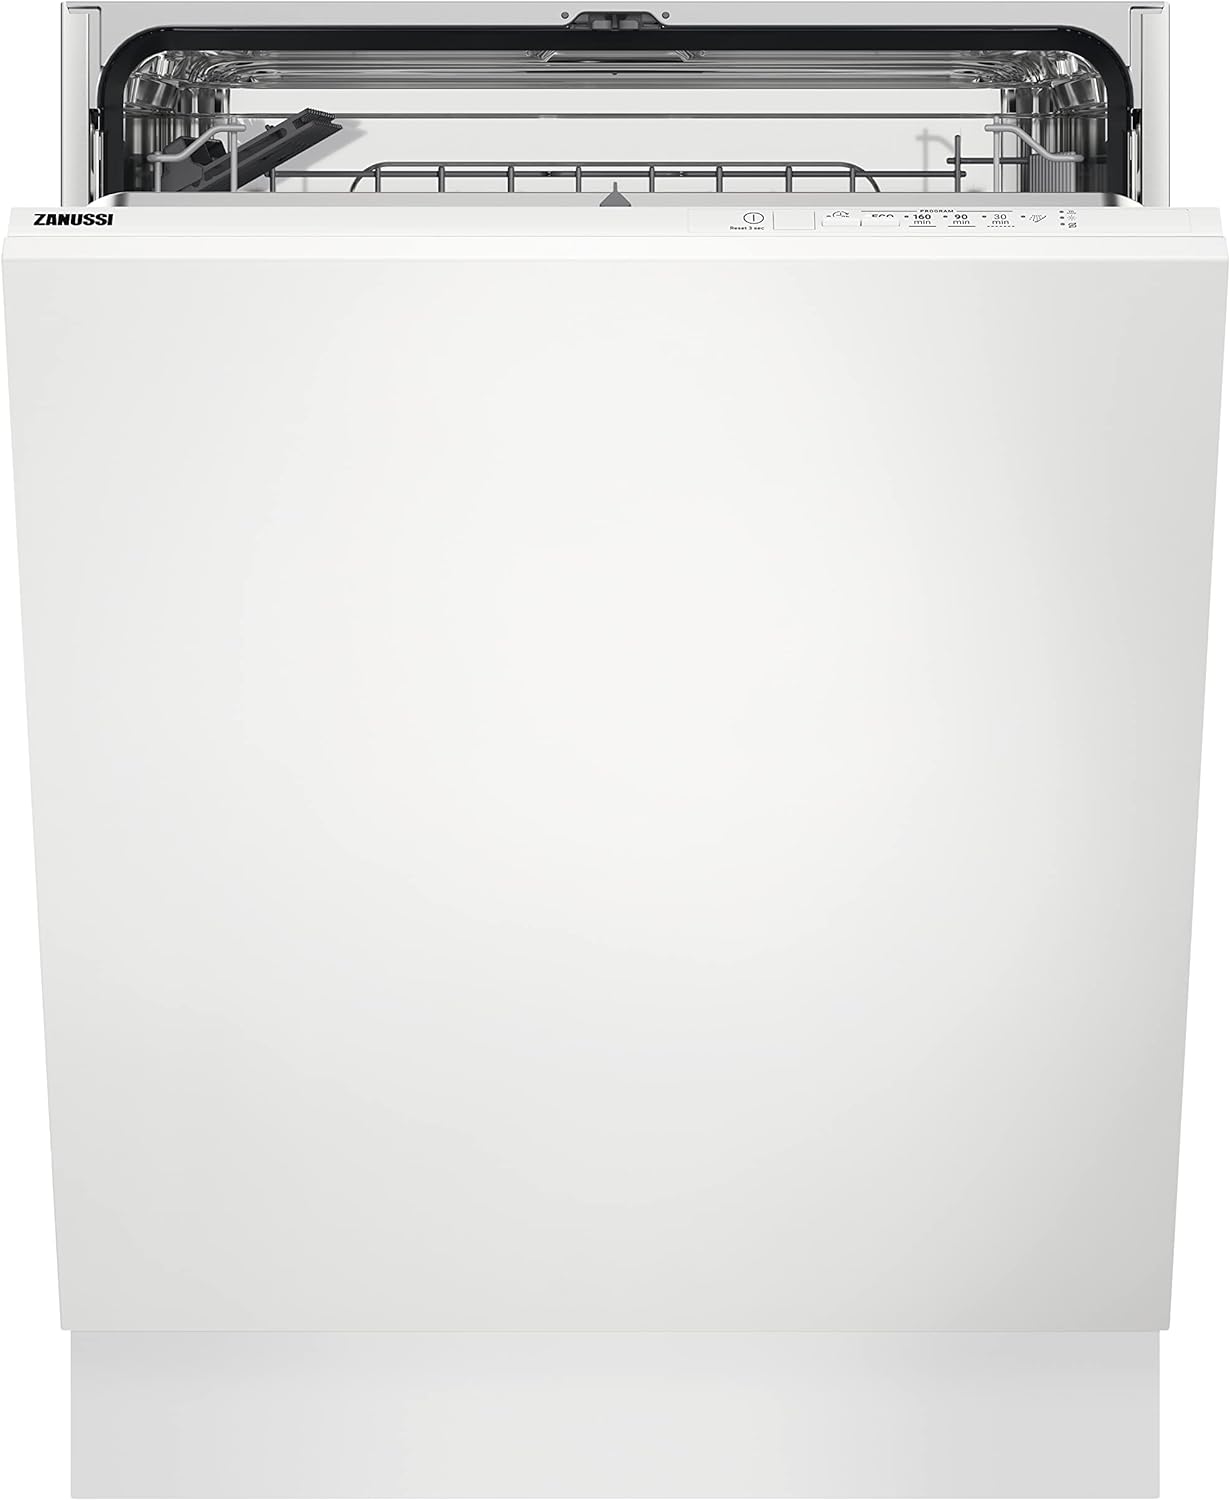 Zanussi Series 20 AirDry Fully integrated Dishwasher with AirDry Technology ZDLN1522 13 Settings, 5 Programmes, 60cm, Quick Wash, Rinse & Hold, White [Energy Class E] - Amazing Gadgets Outlet